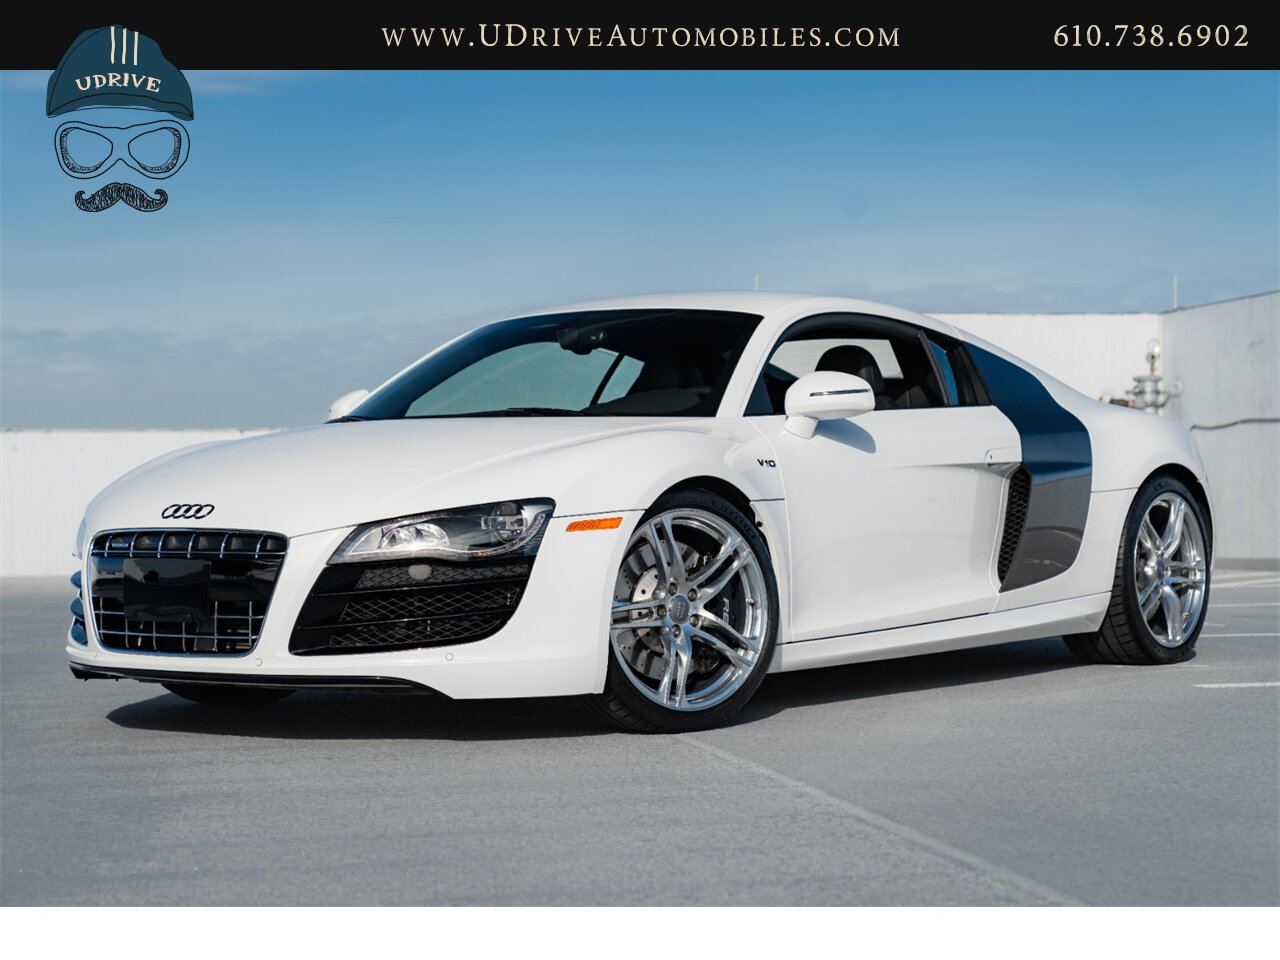 2010 Audi R8 5.2 Quattro V10 6 Speed Manual 8k Miles  Ibis White Service History - Photo 1 - West Chester, PA 19382